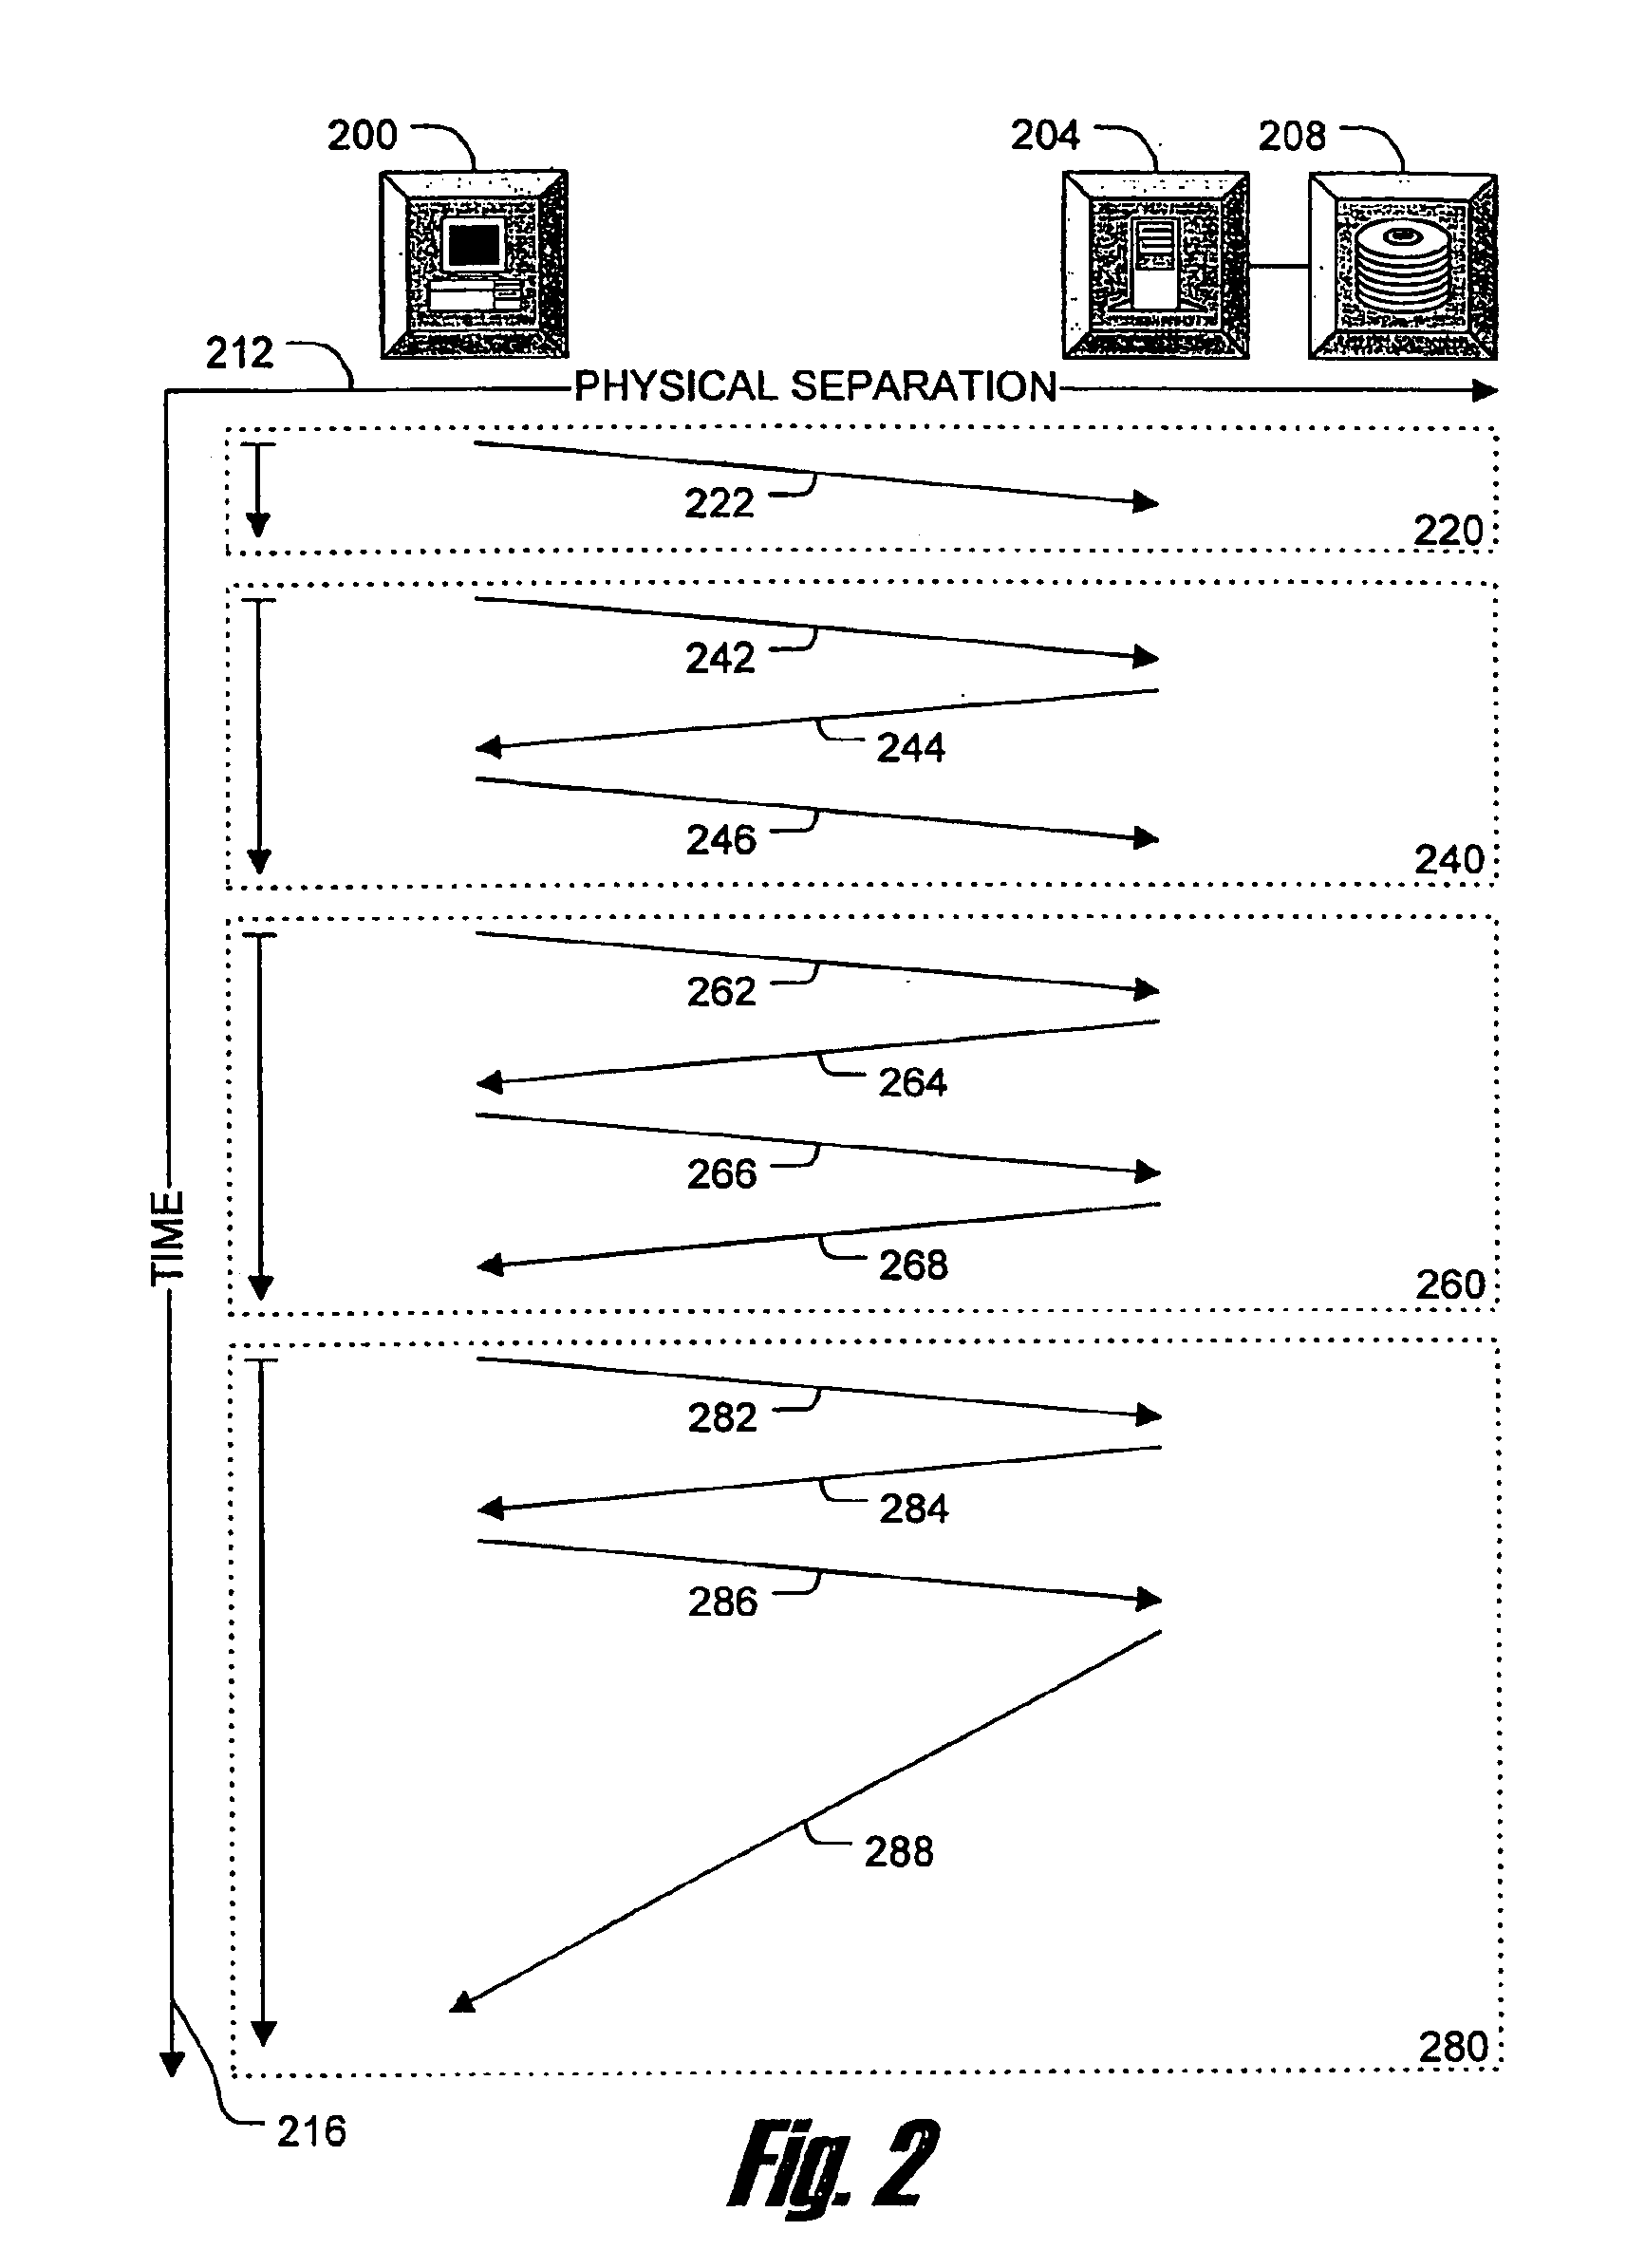 Method and apparatus for efficient data browsing